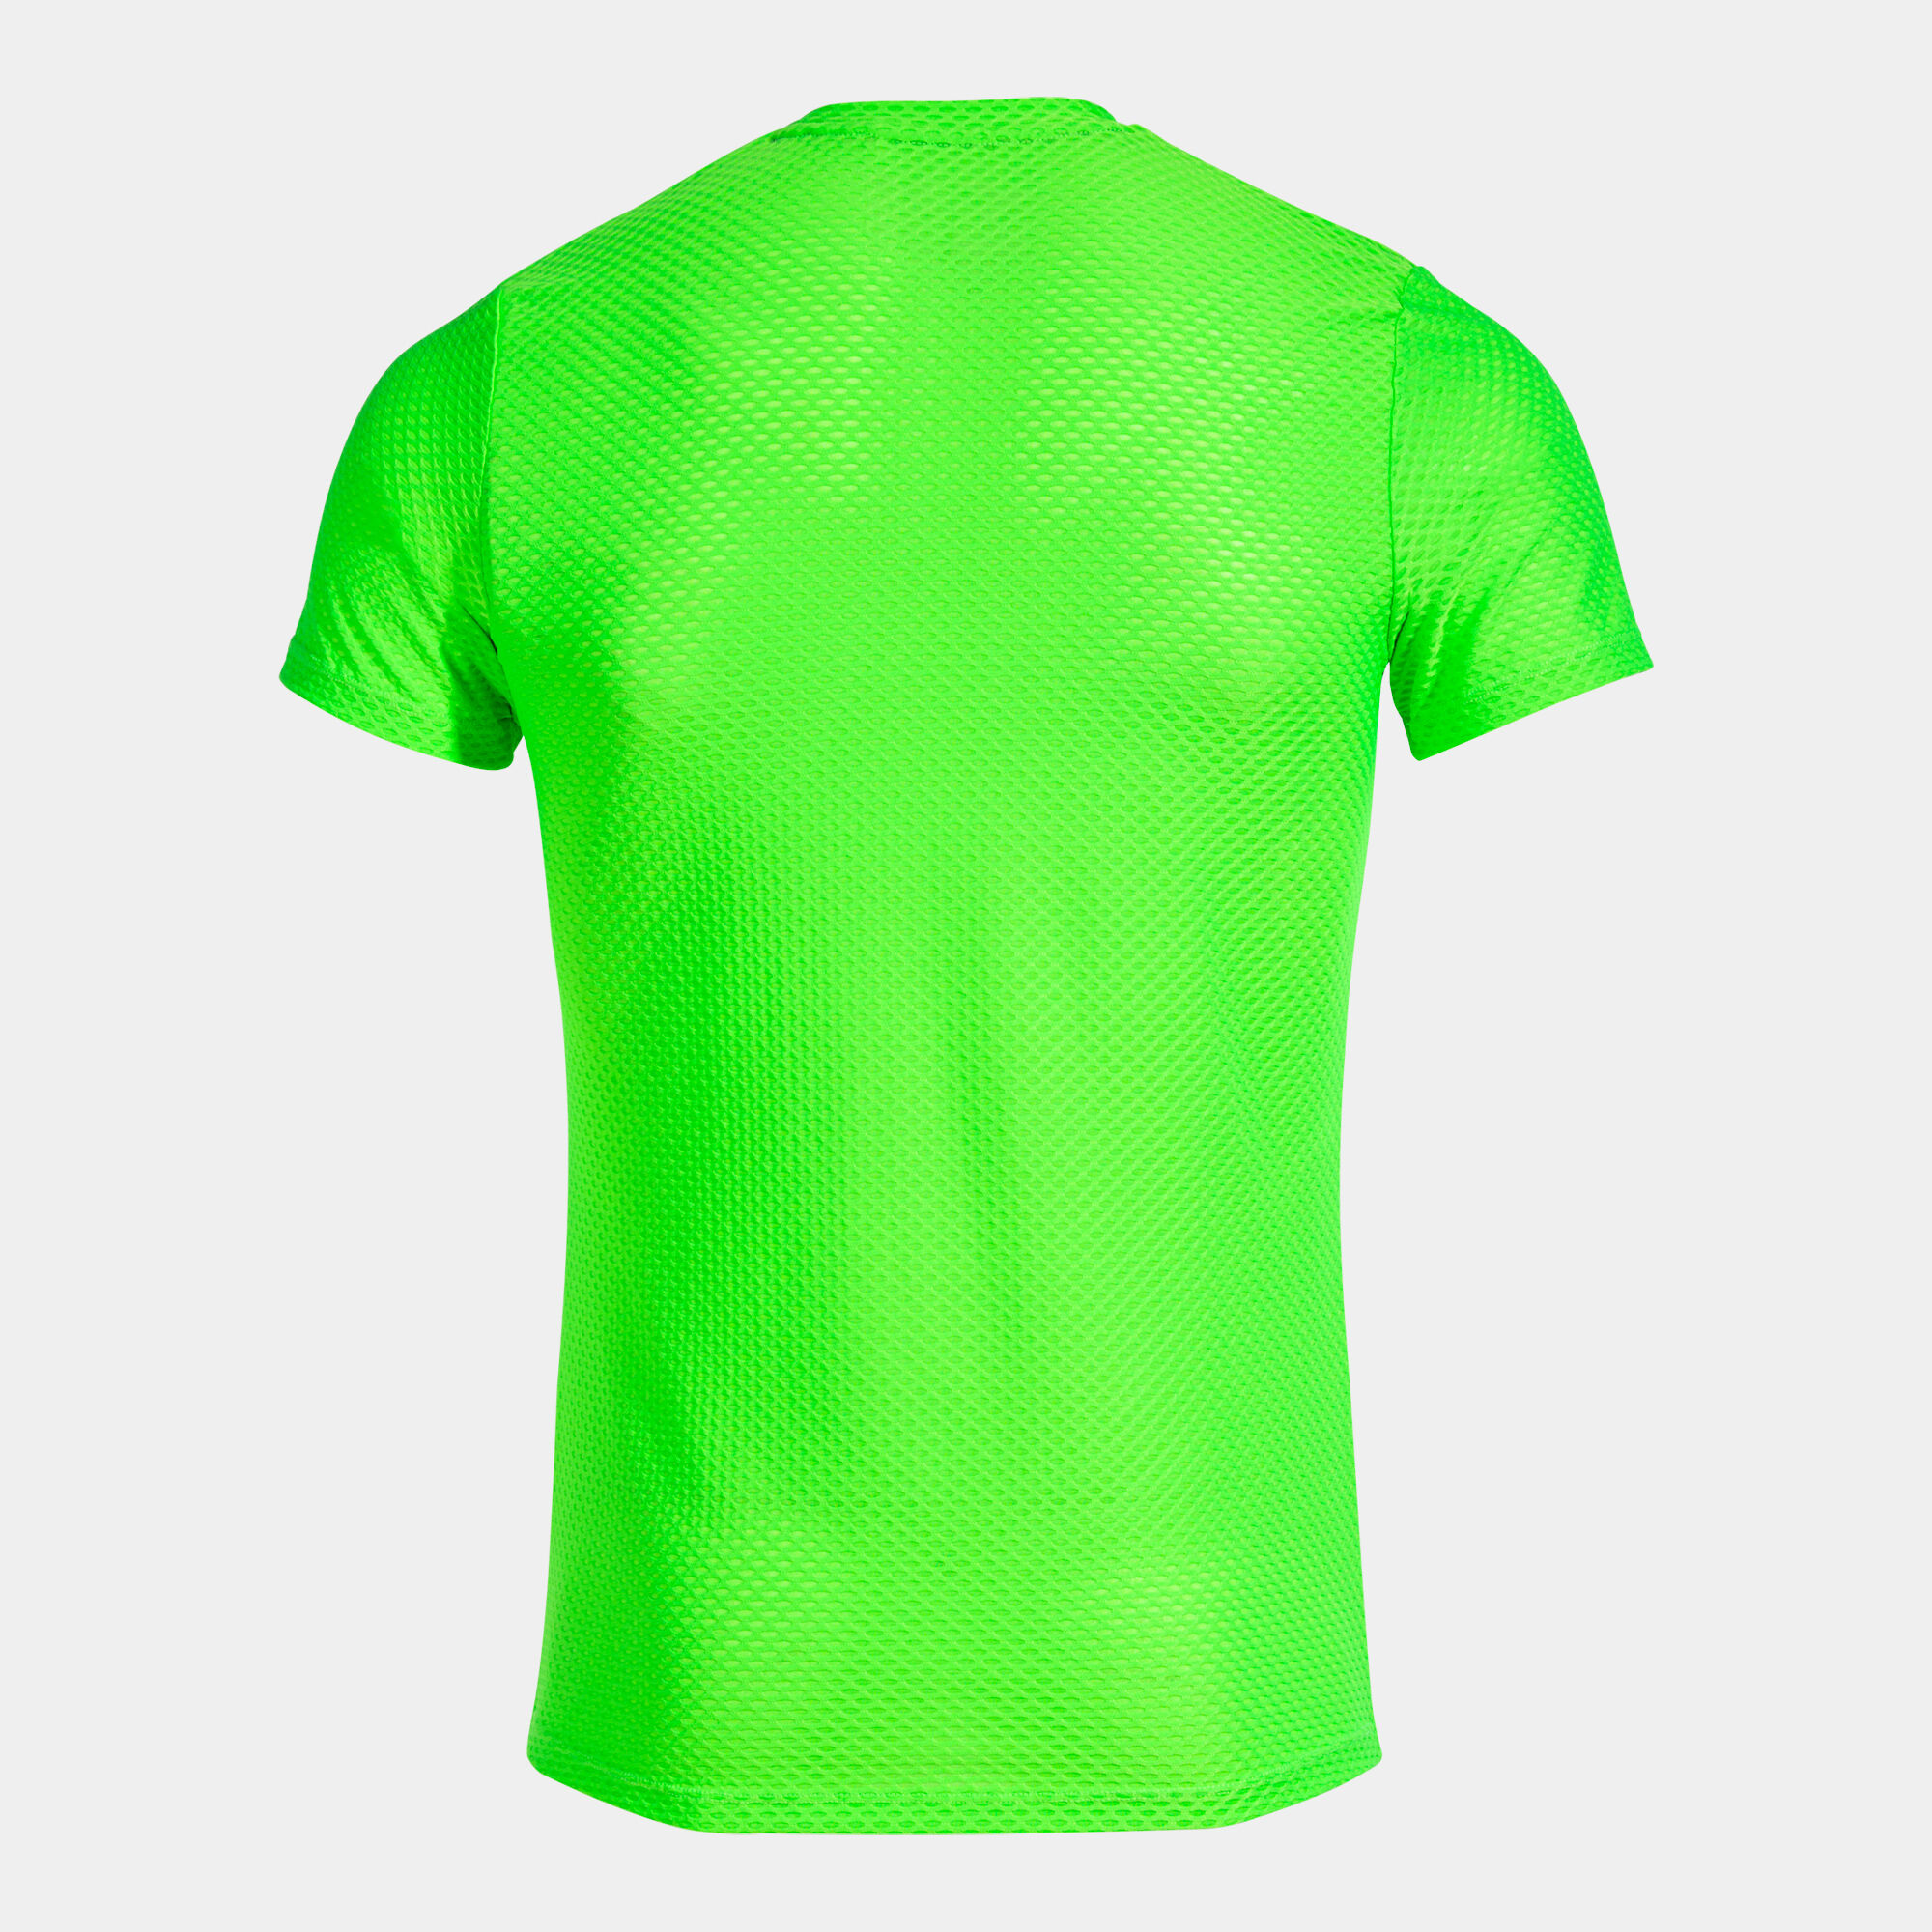 Maillot manches courtes homme R-City vert fluo